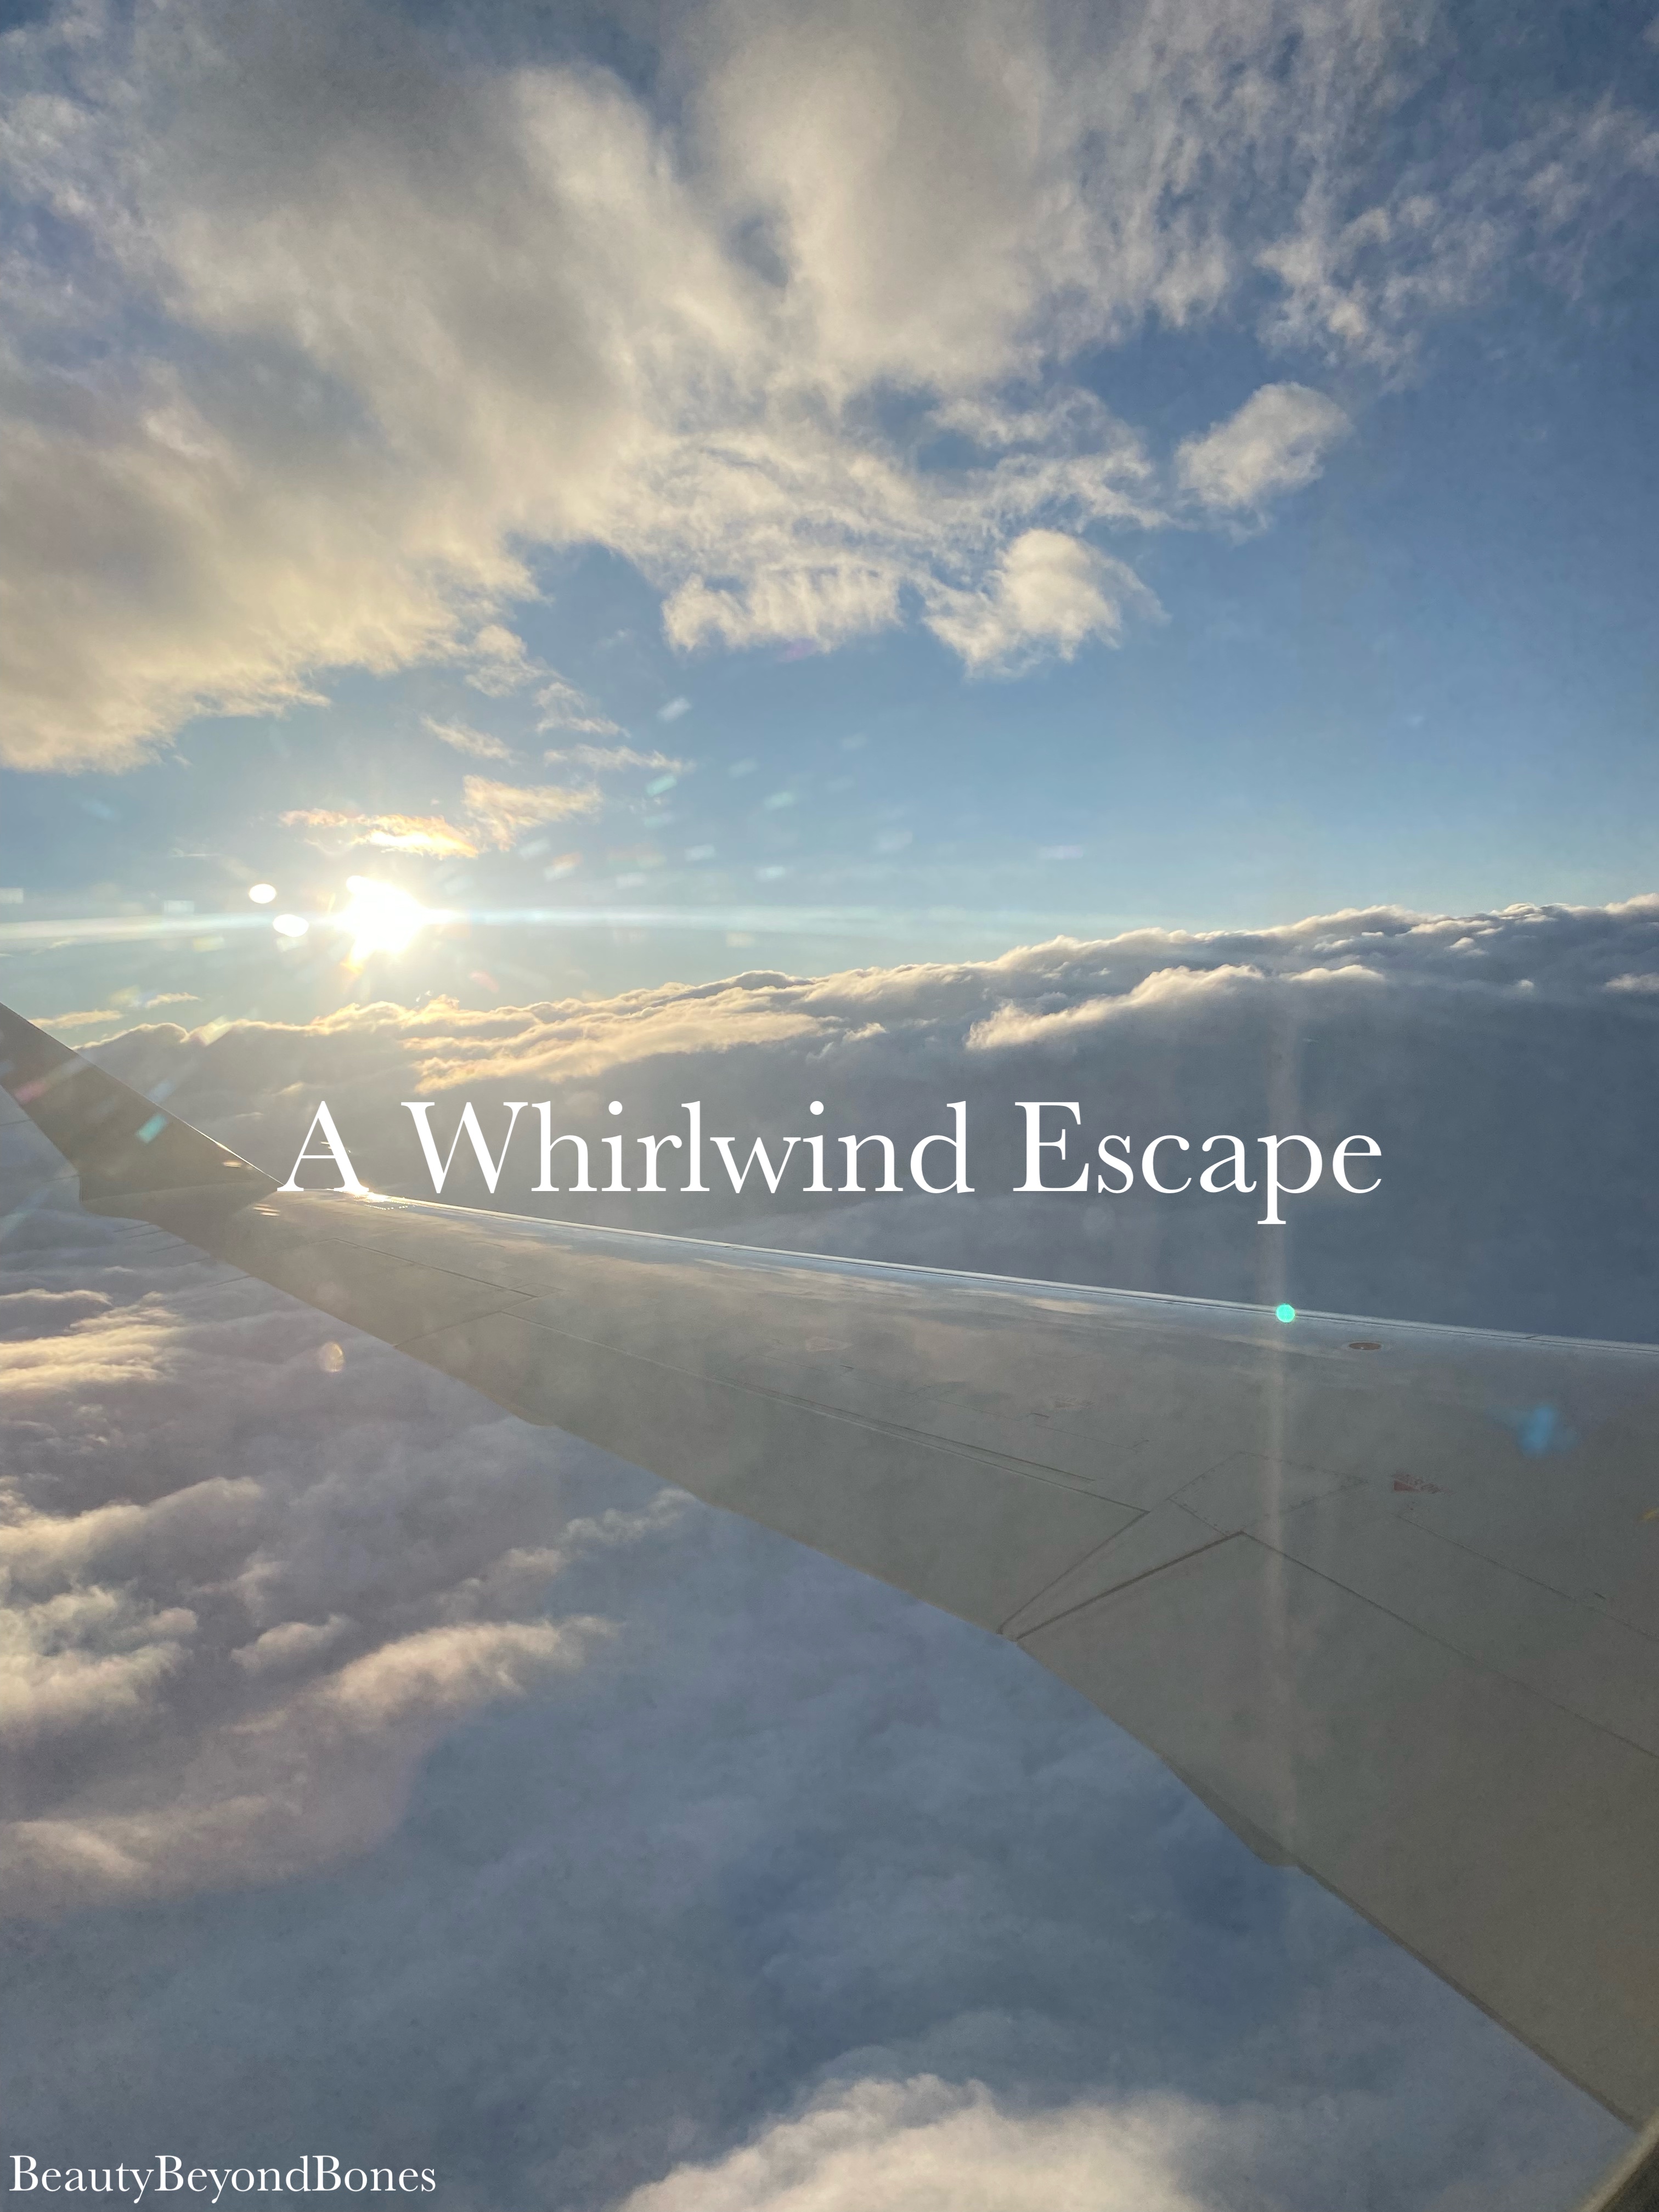 A Whirlwind Escape